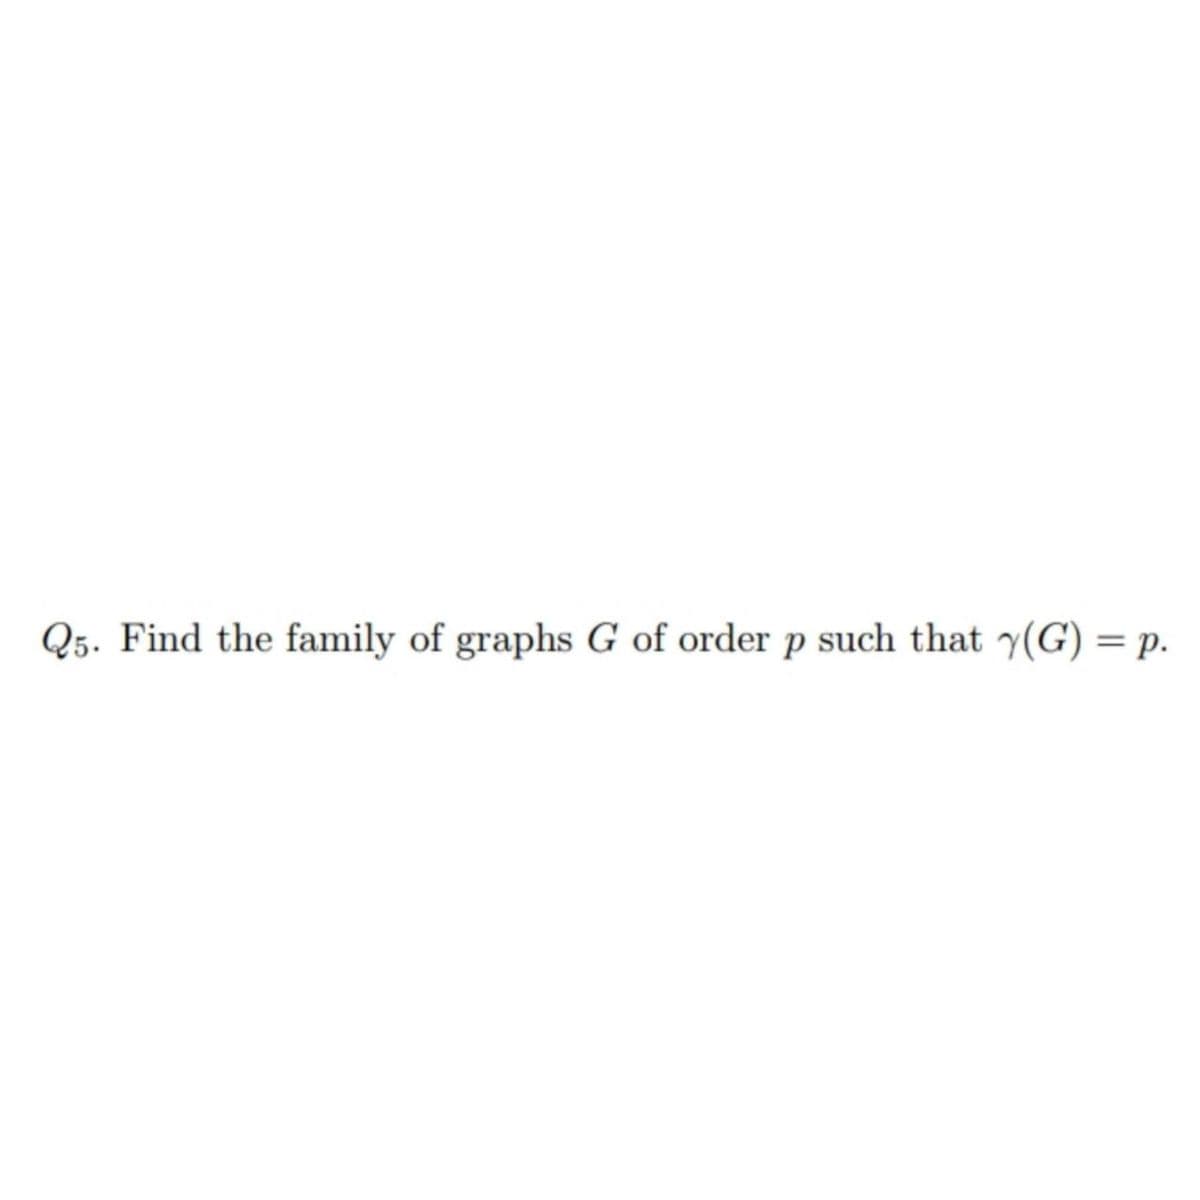 Q5. Find the family of graphs G of order p such that y(G) = p.